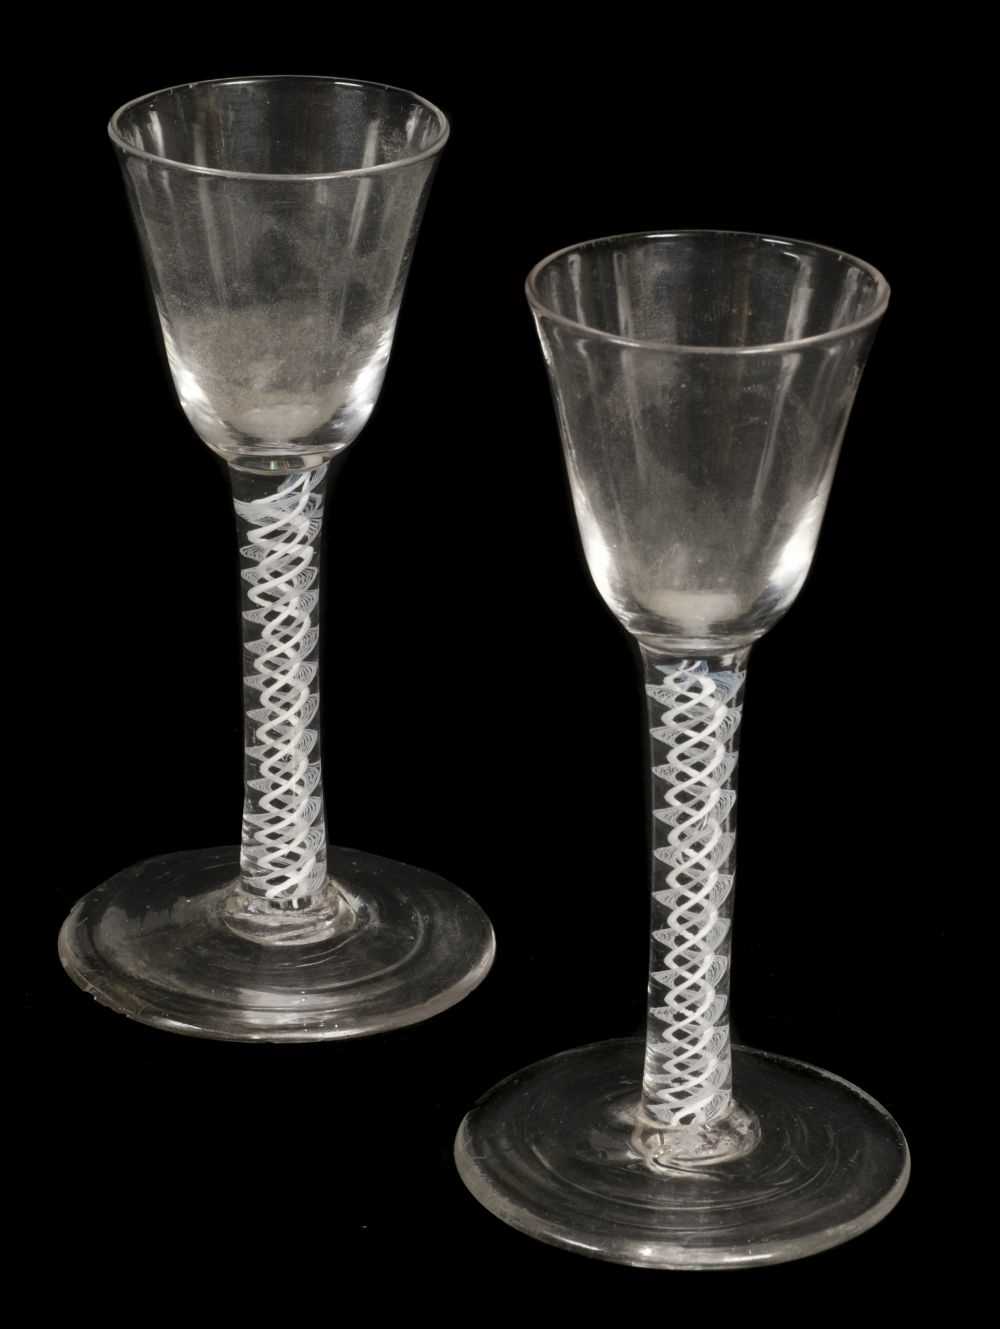 Lot 285 - Drinking Glass. A pair of 18th-century drinking glasses